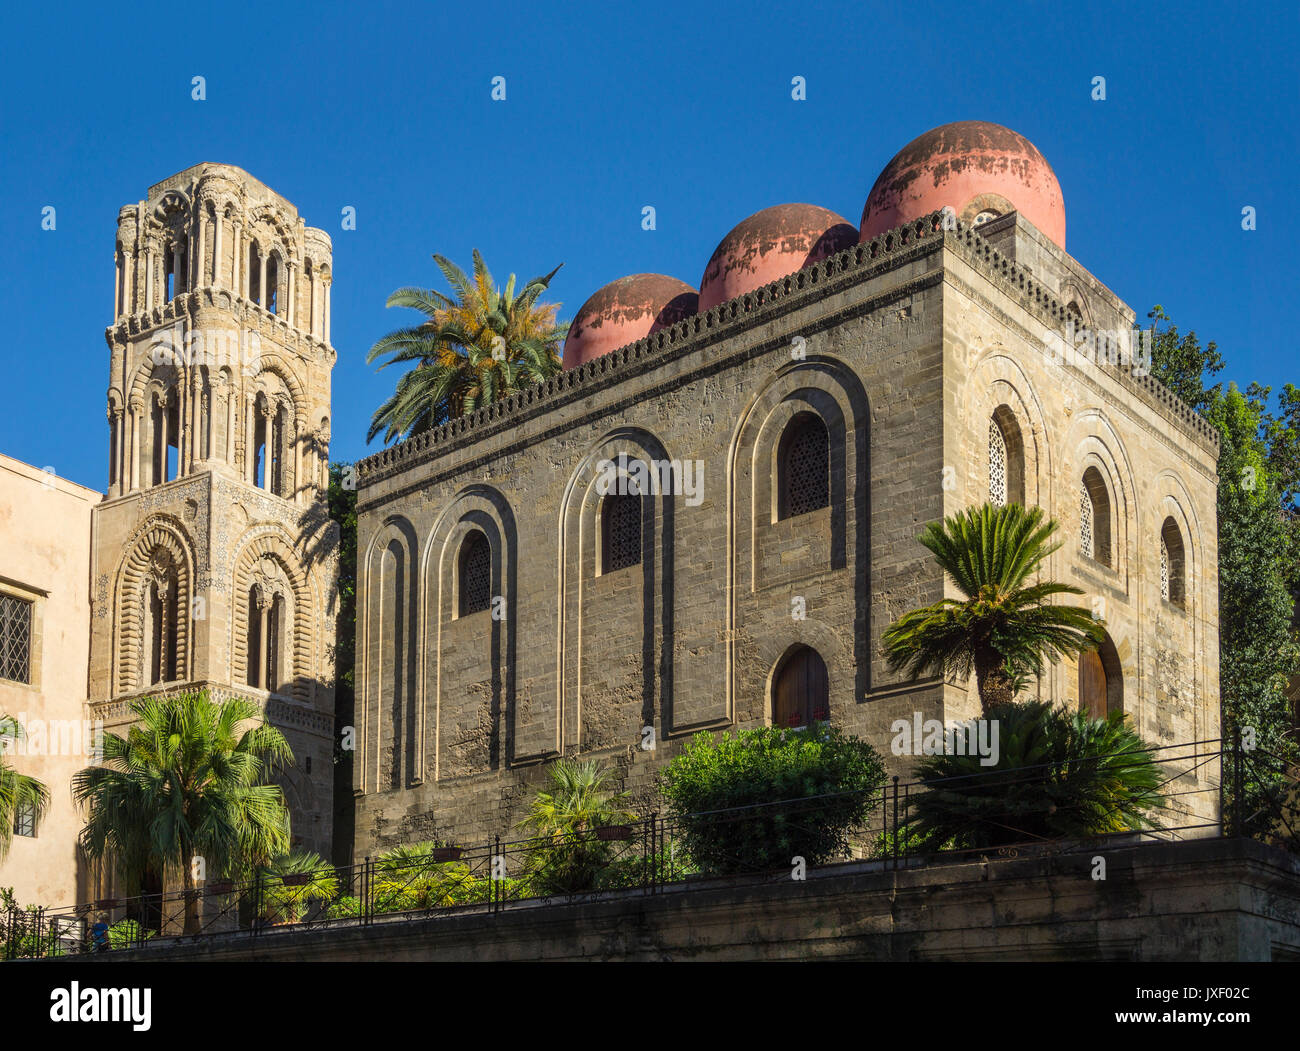 San Cataldo church with its pink domes and the bell tower of Santa Maria dell' Ammiraglio, La Martorana, behind, in the Piazza Bellini, Central Palerm Stock Photo